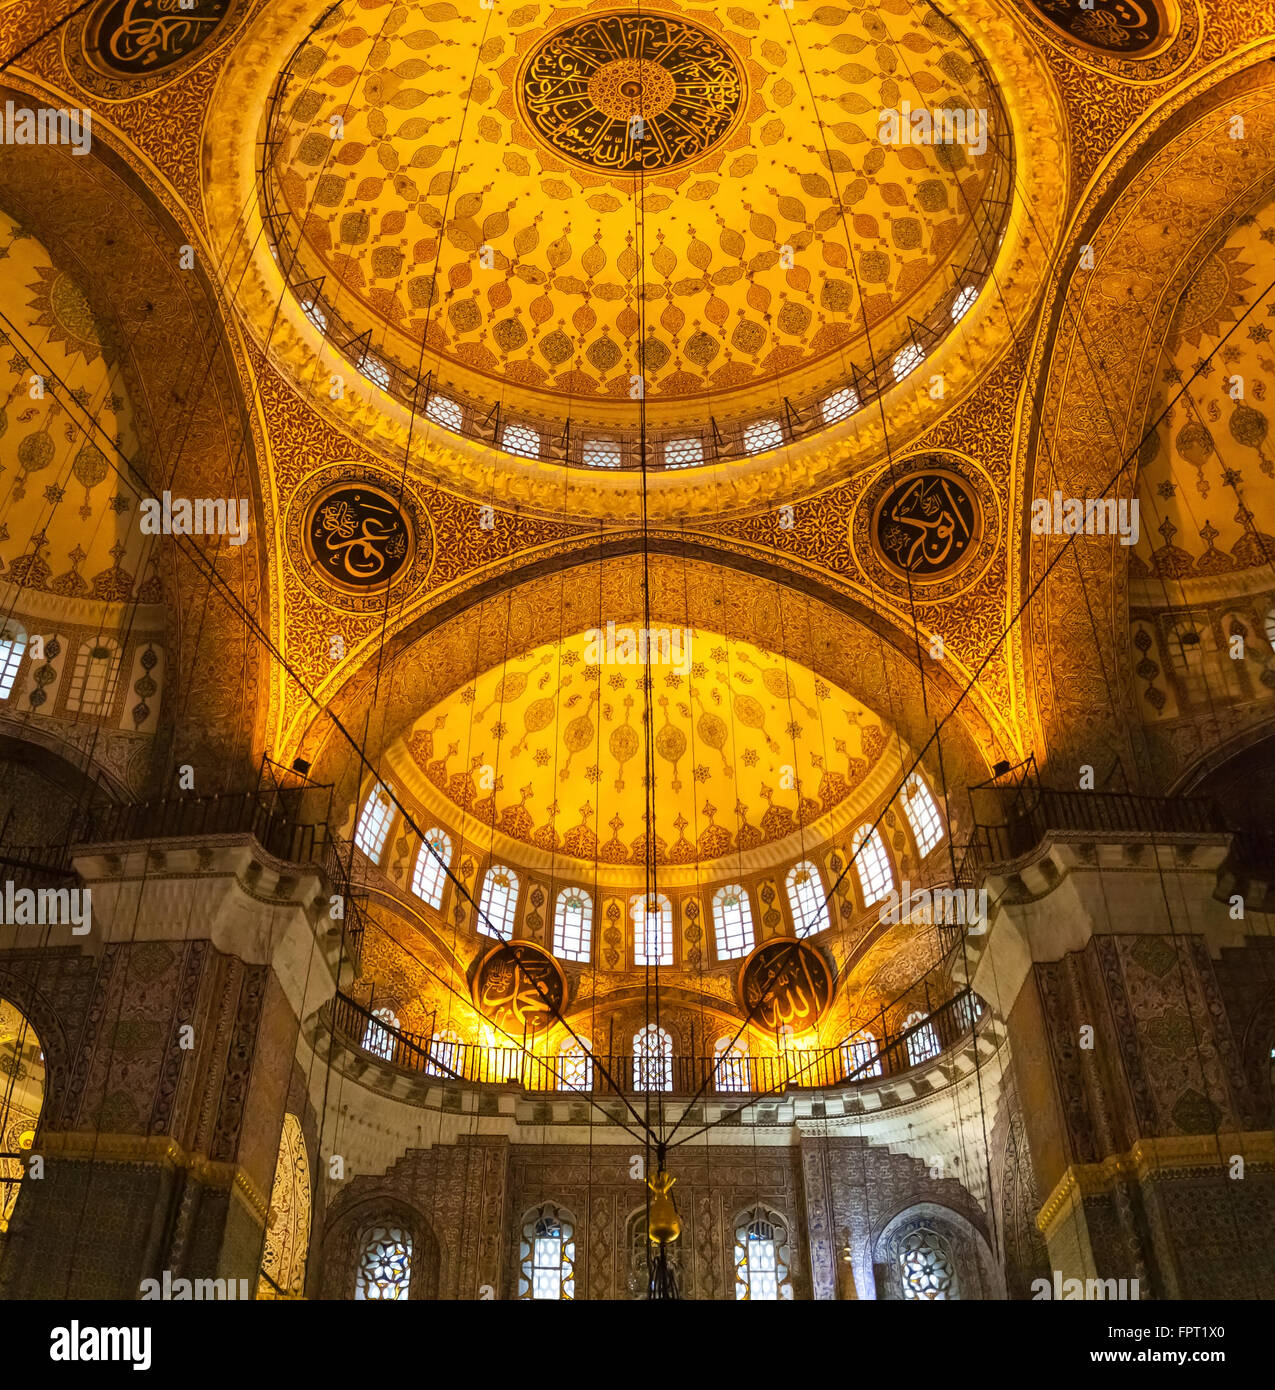 The New Mosque Yeni Valide Camii, an Ottoman Imperial Mosque interior architecture in Istanbul, Turkey, Eminonu district Stock Photo